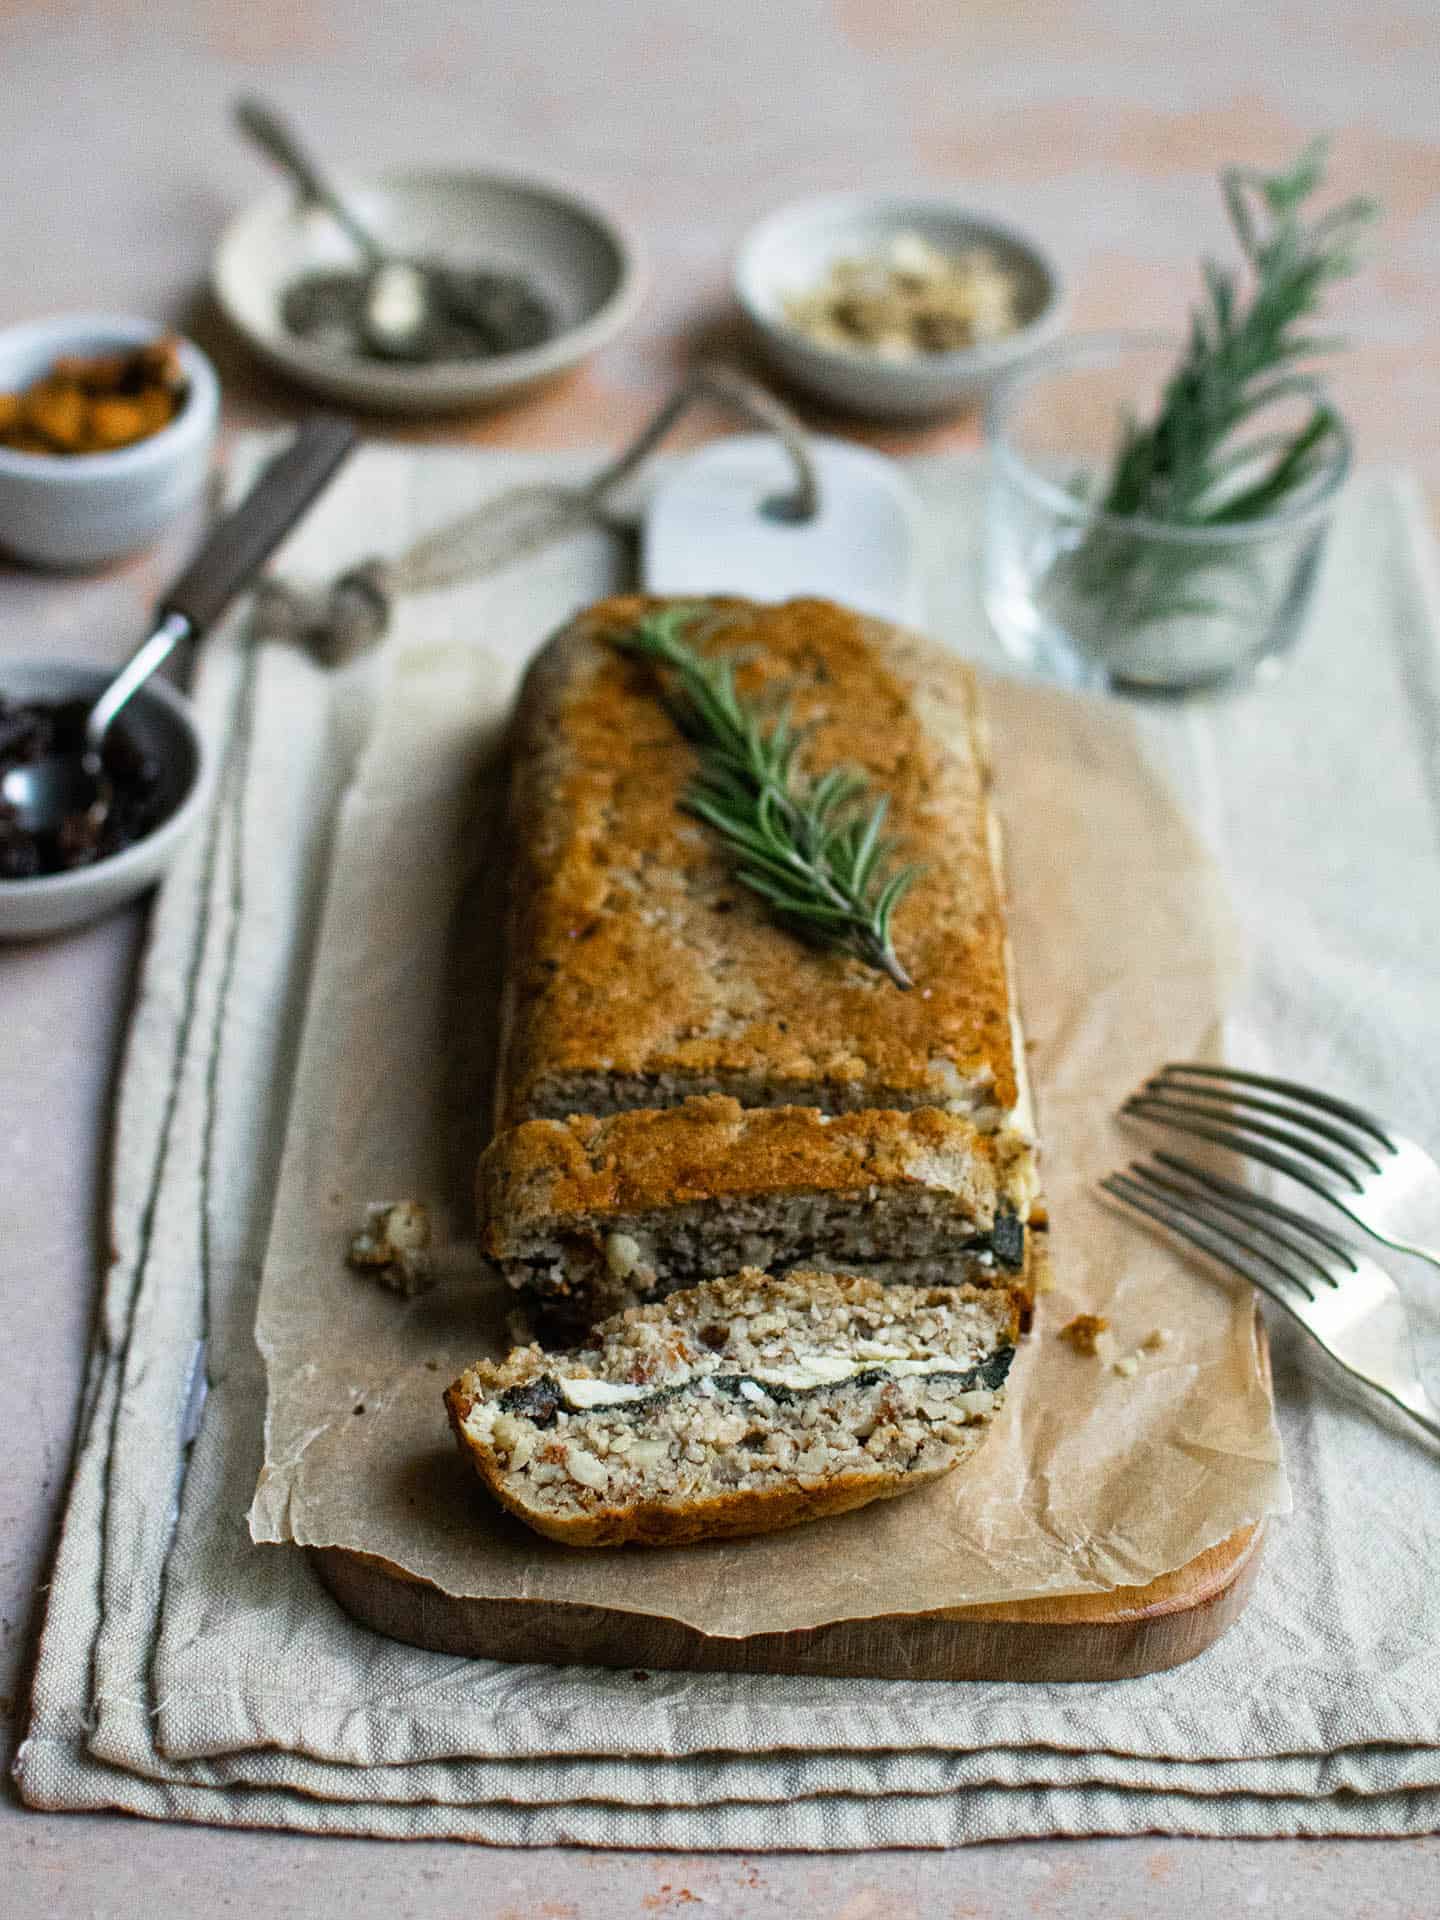 A cashew nut roast sat on some parchment paper, with two slices cut into it. The closest slice is laying on its side which shows a layer of spinach and cheese running through the middle.